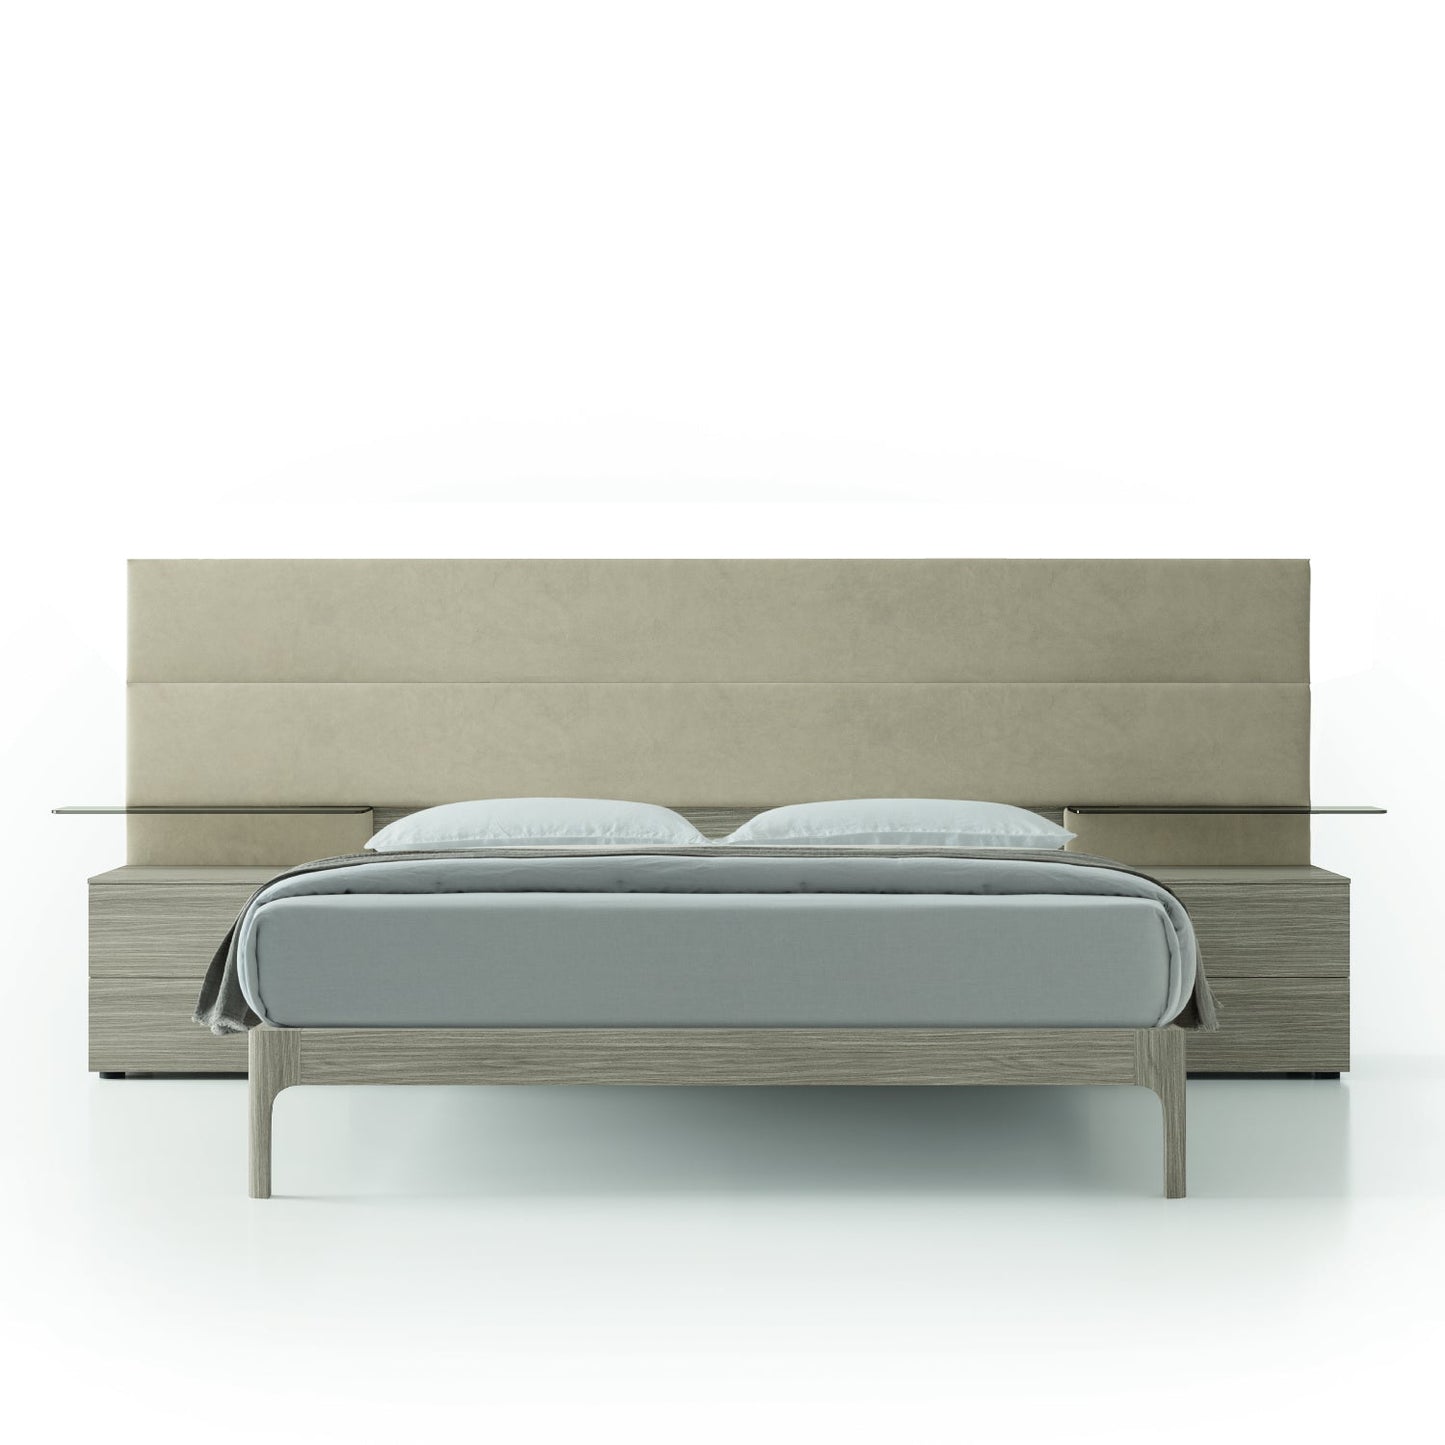 Scacco System Bedroom Composition HNC 015